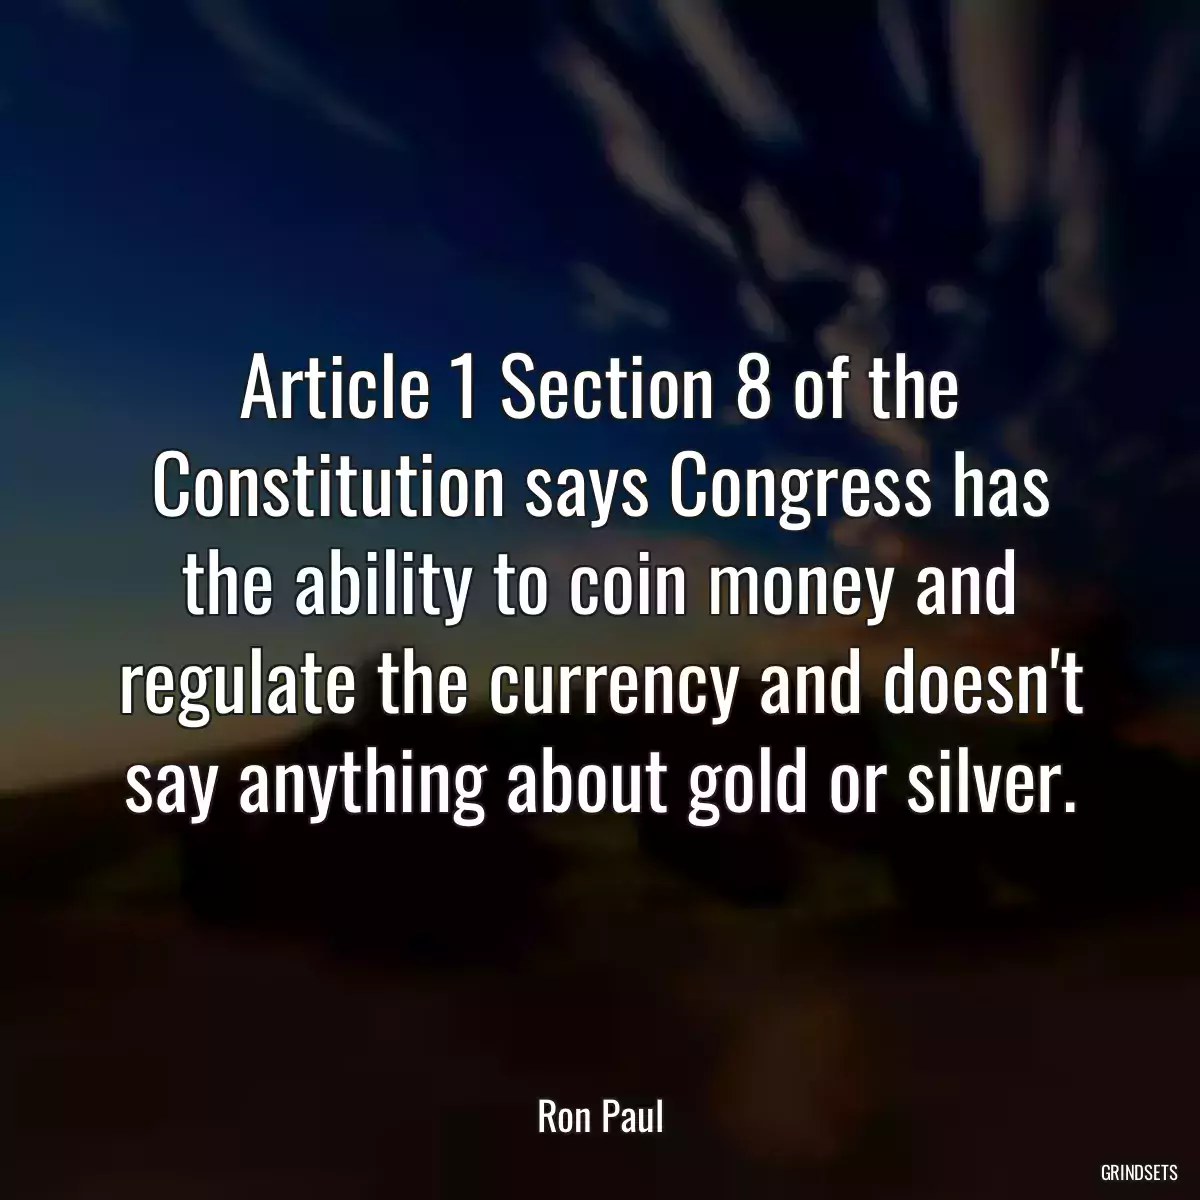 Article 1 Section 8 of the Constitution says Congress has the ability to coin money and regulate the currency and doesn\'t say anything about gold or silver.